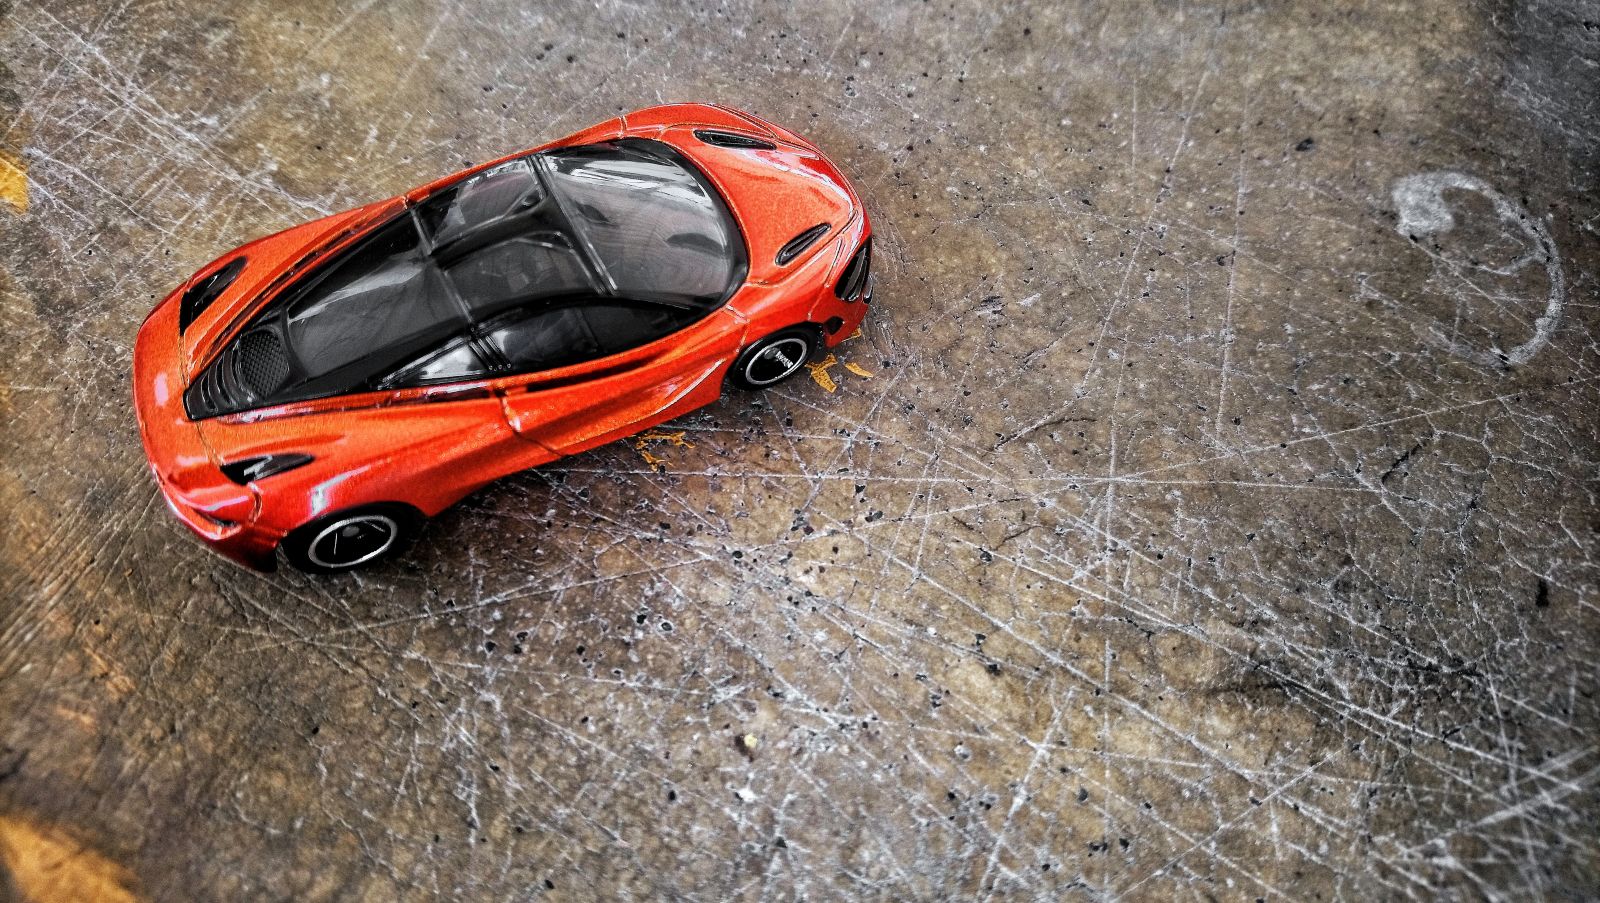 Illustration for article titled Reason to Rise | Tomica vs Hot Wheels | McLaren 720S | Inspection Room